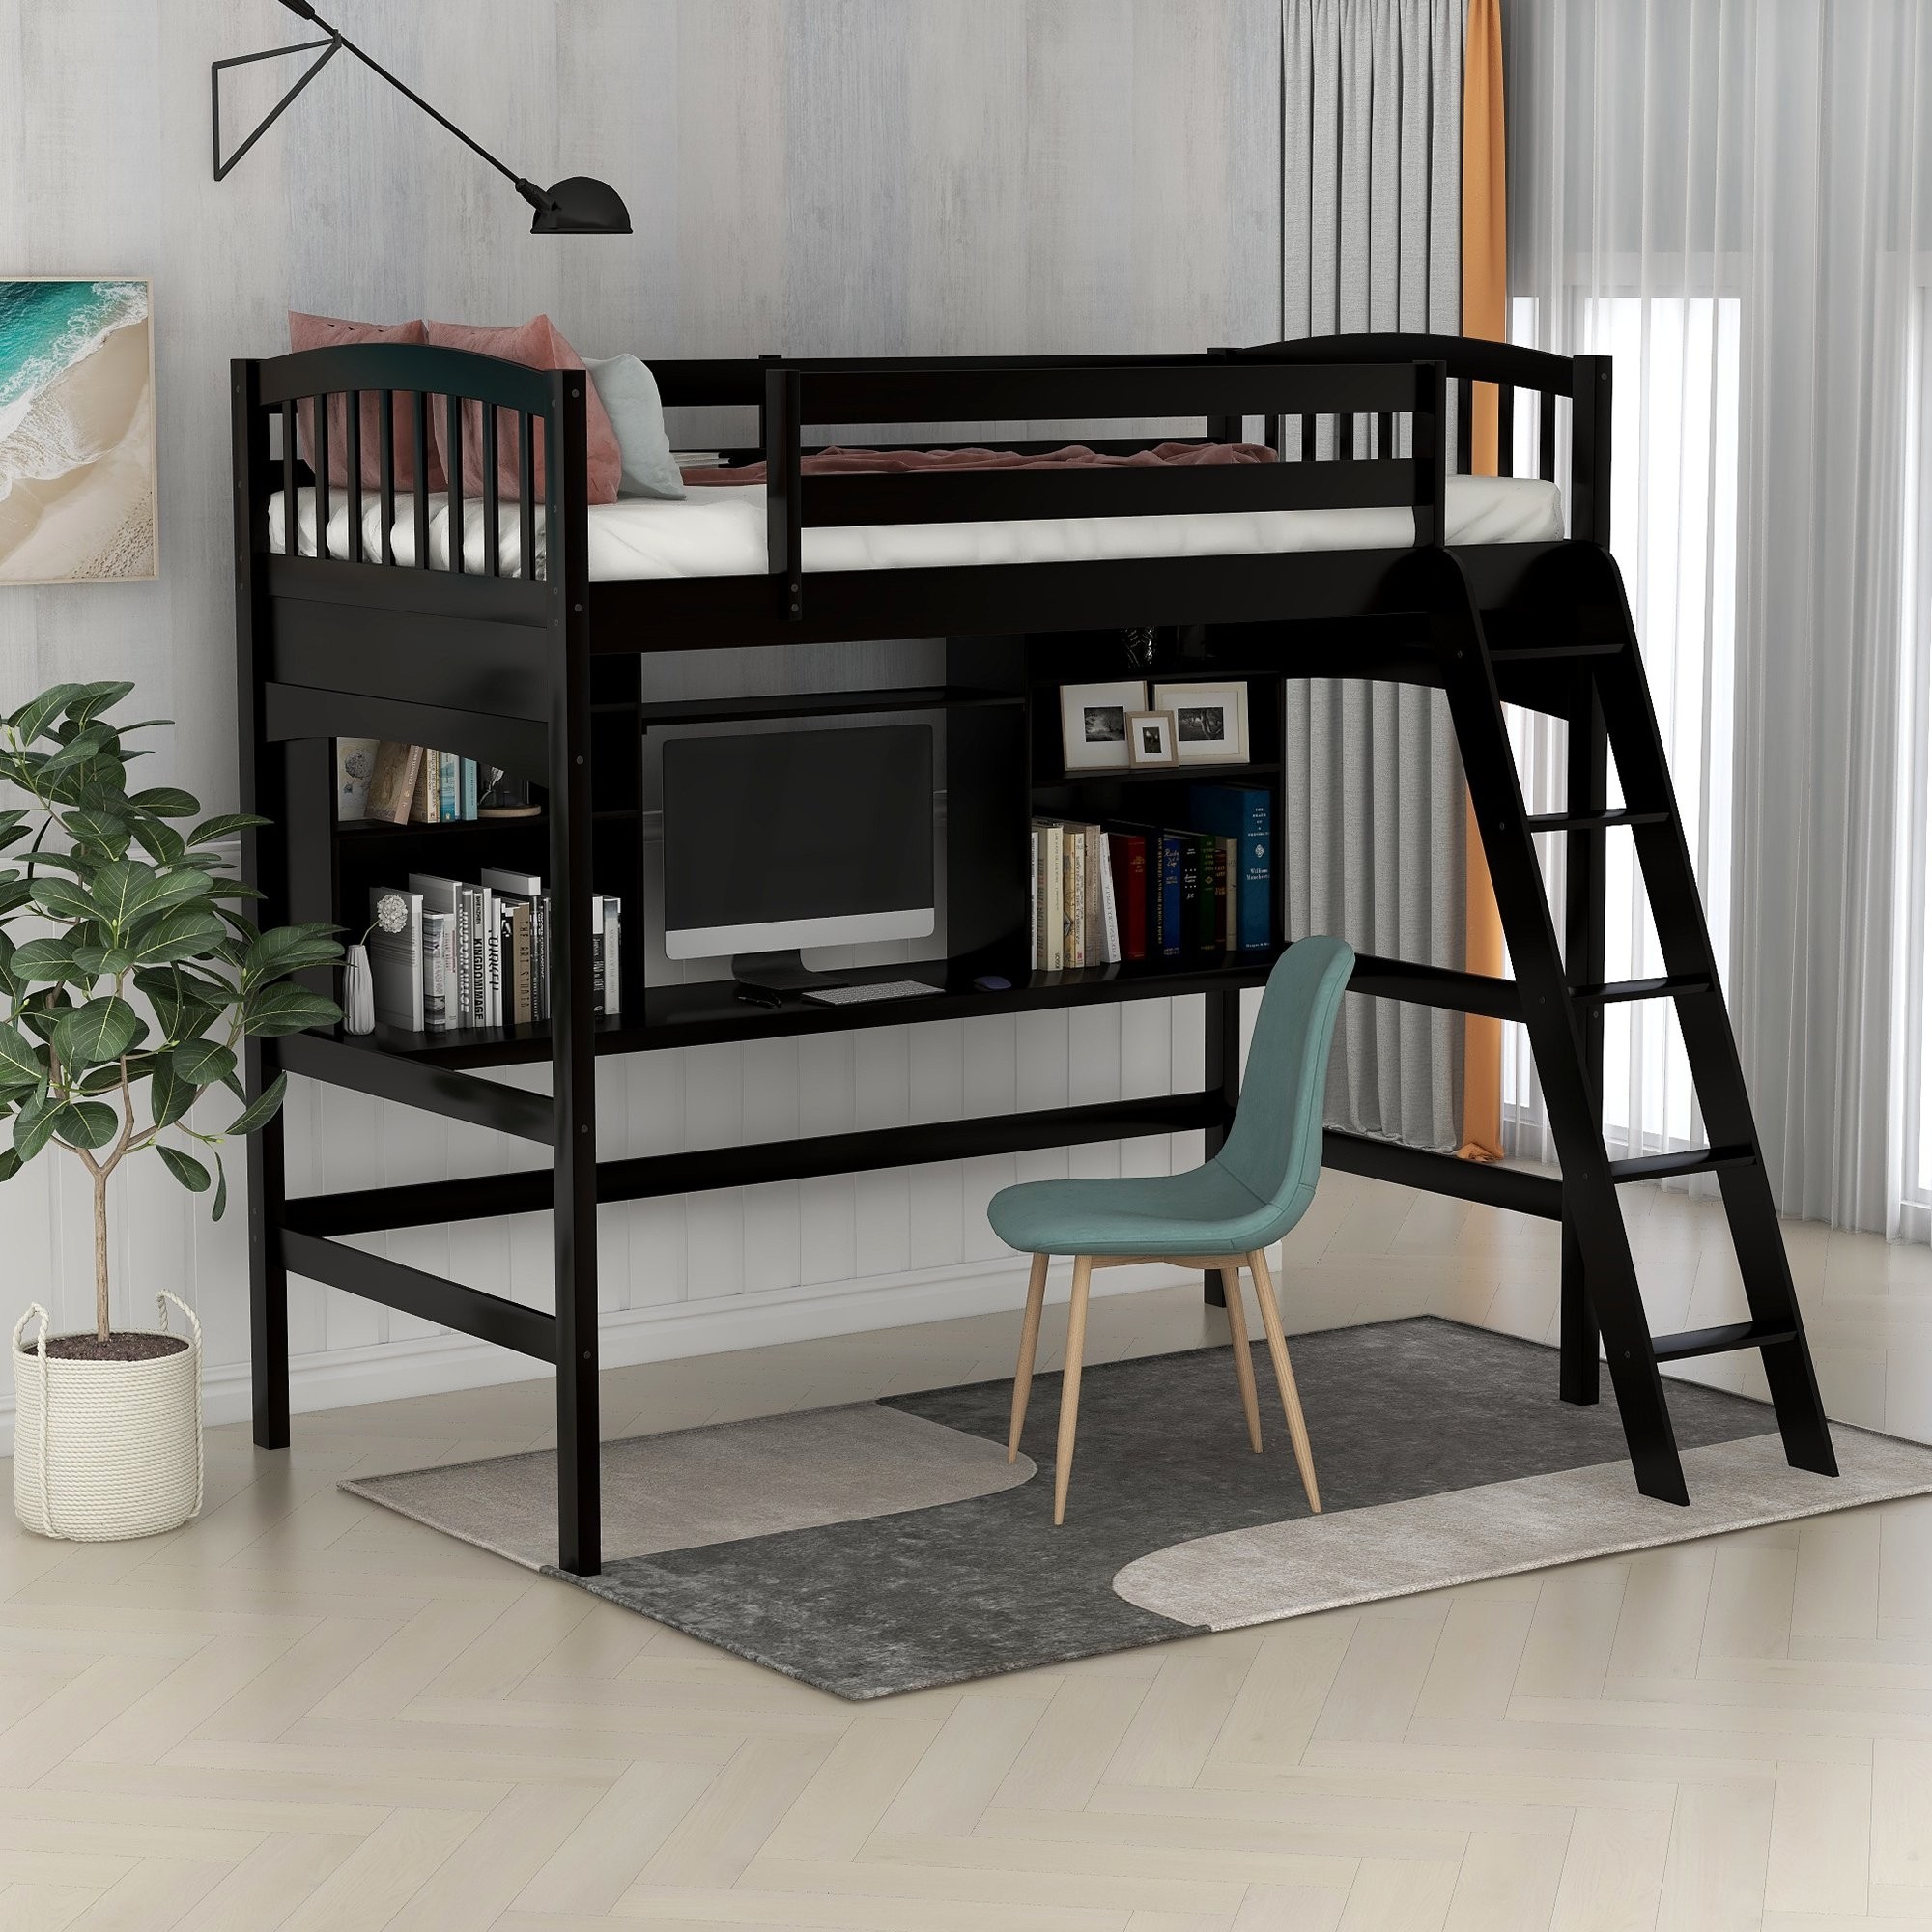 Twin size loft bed with storage shelves desk and ladder